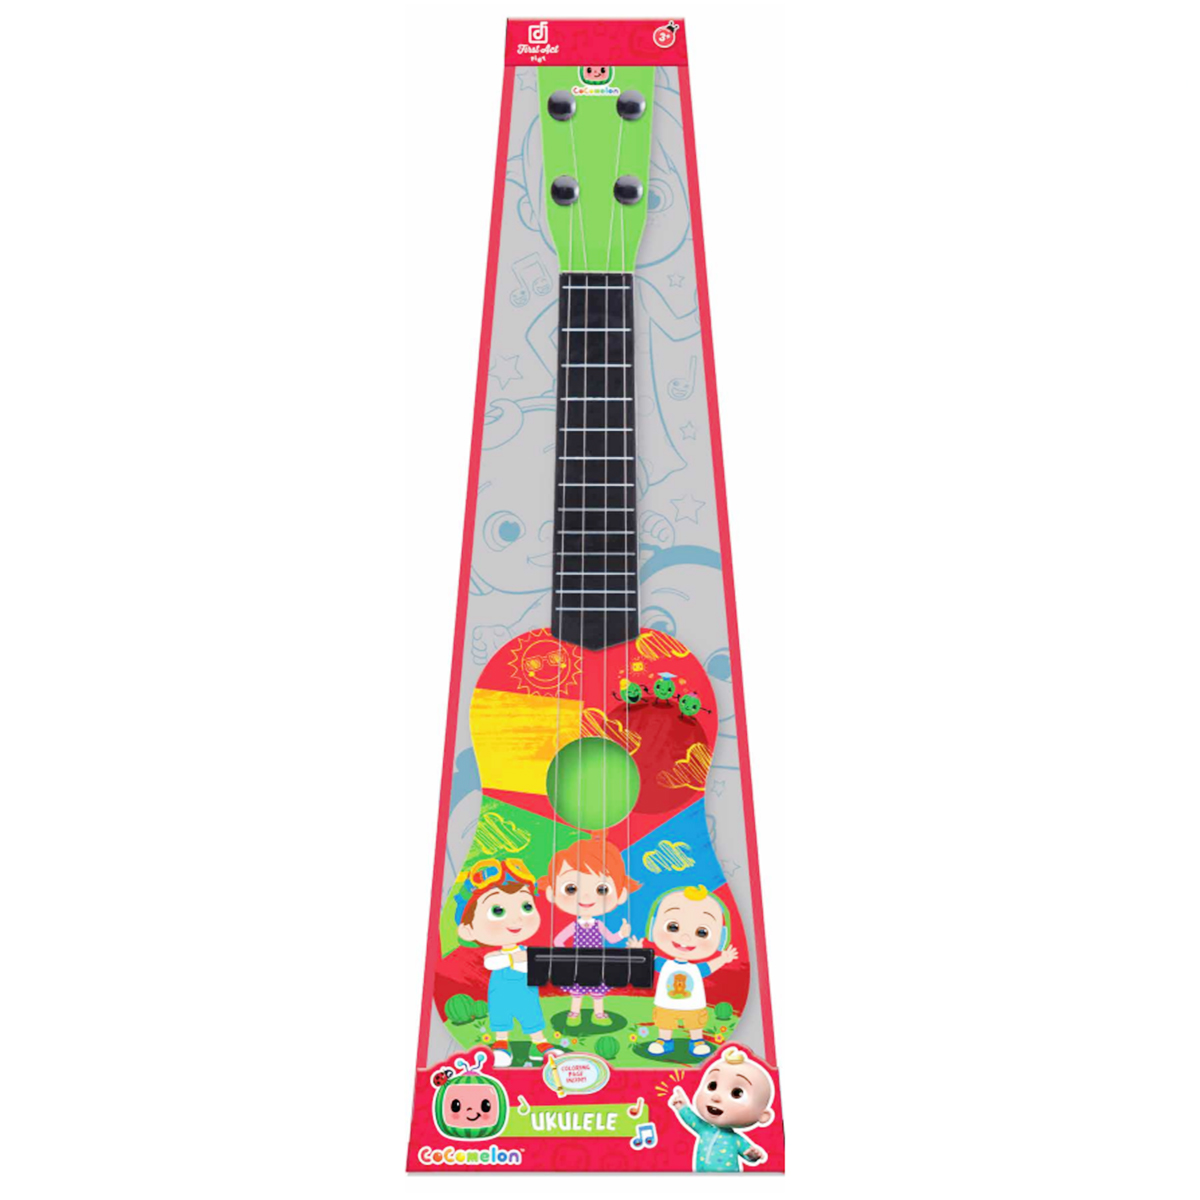 Ukulele Cocomelon, First Act, 40 cm, S2 Act